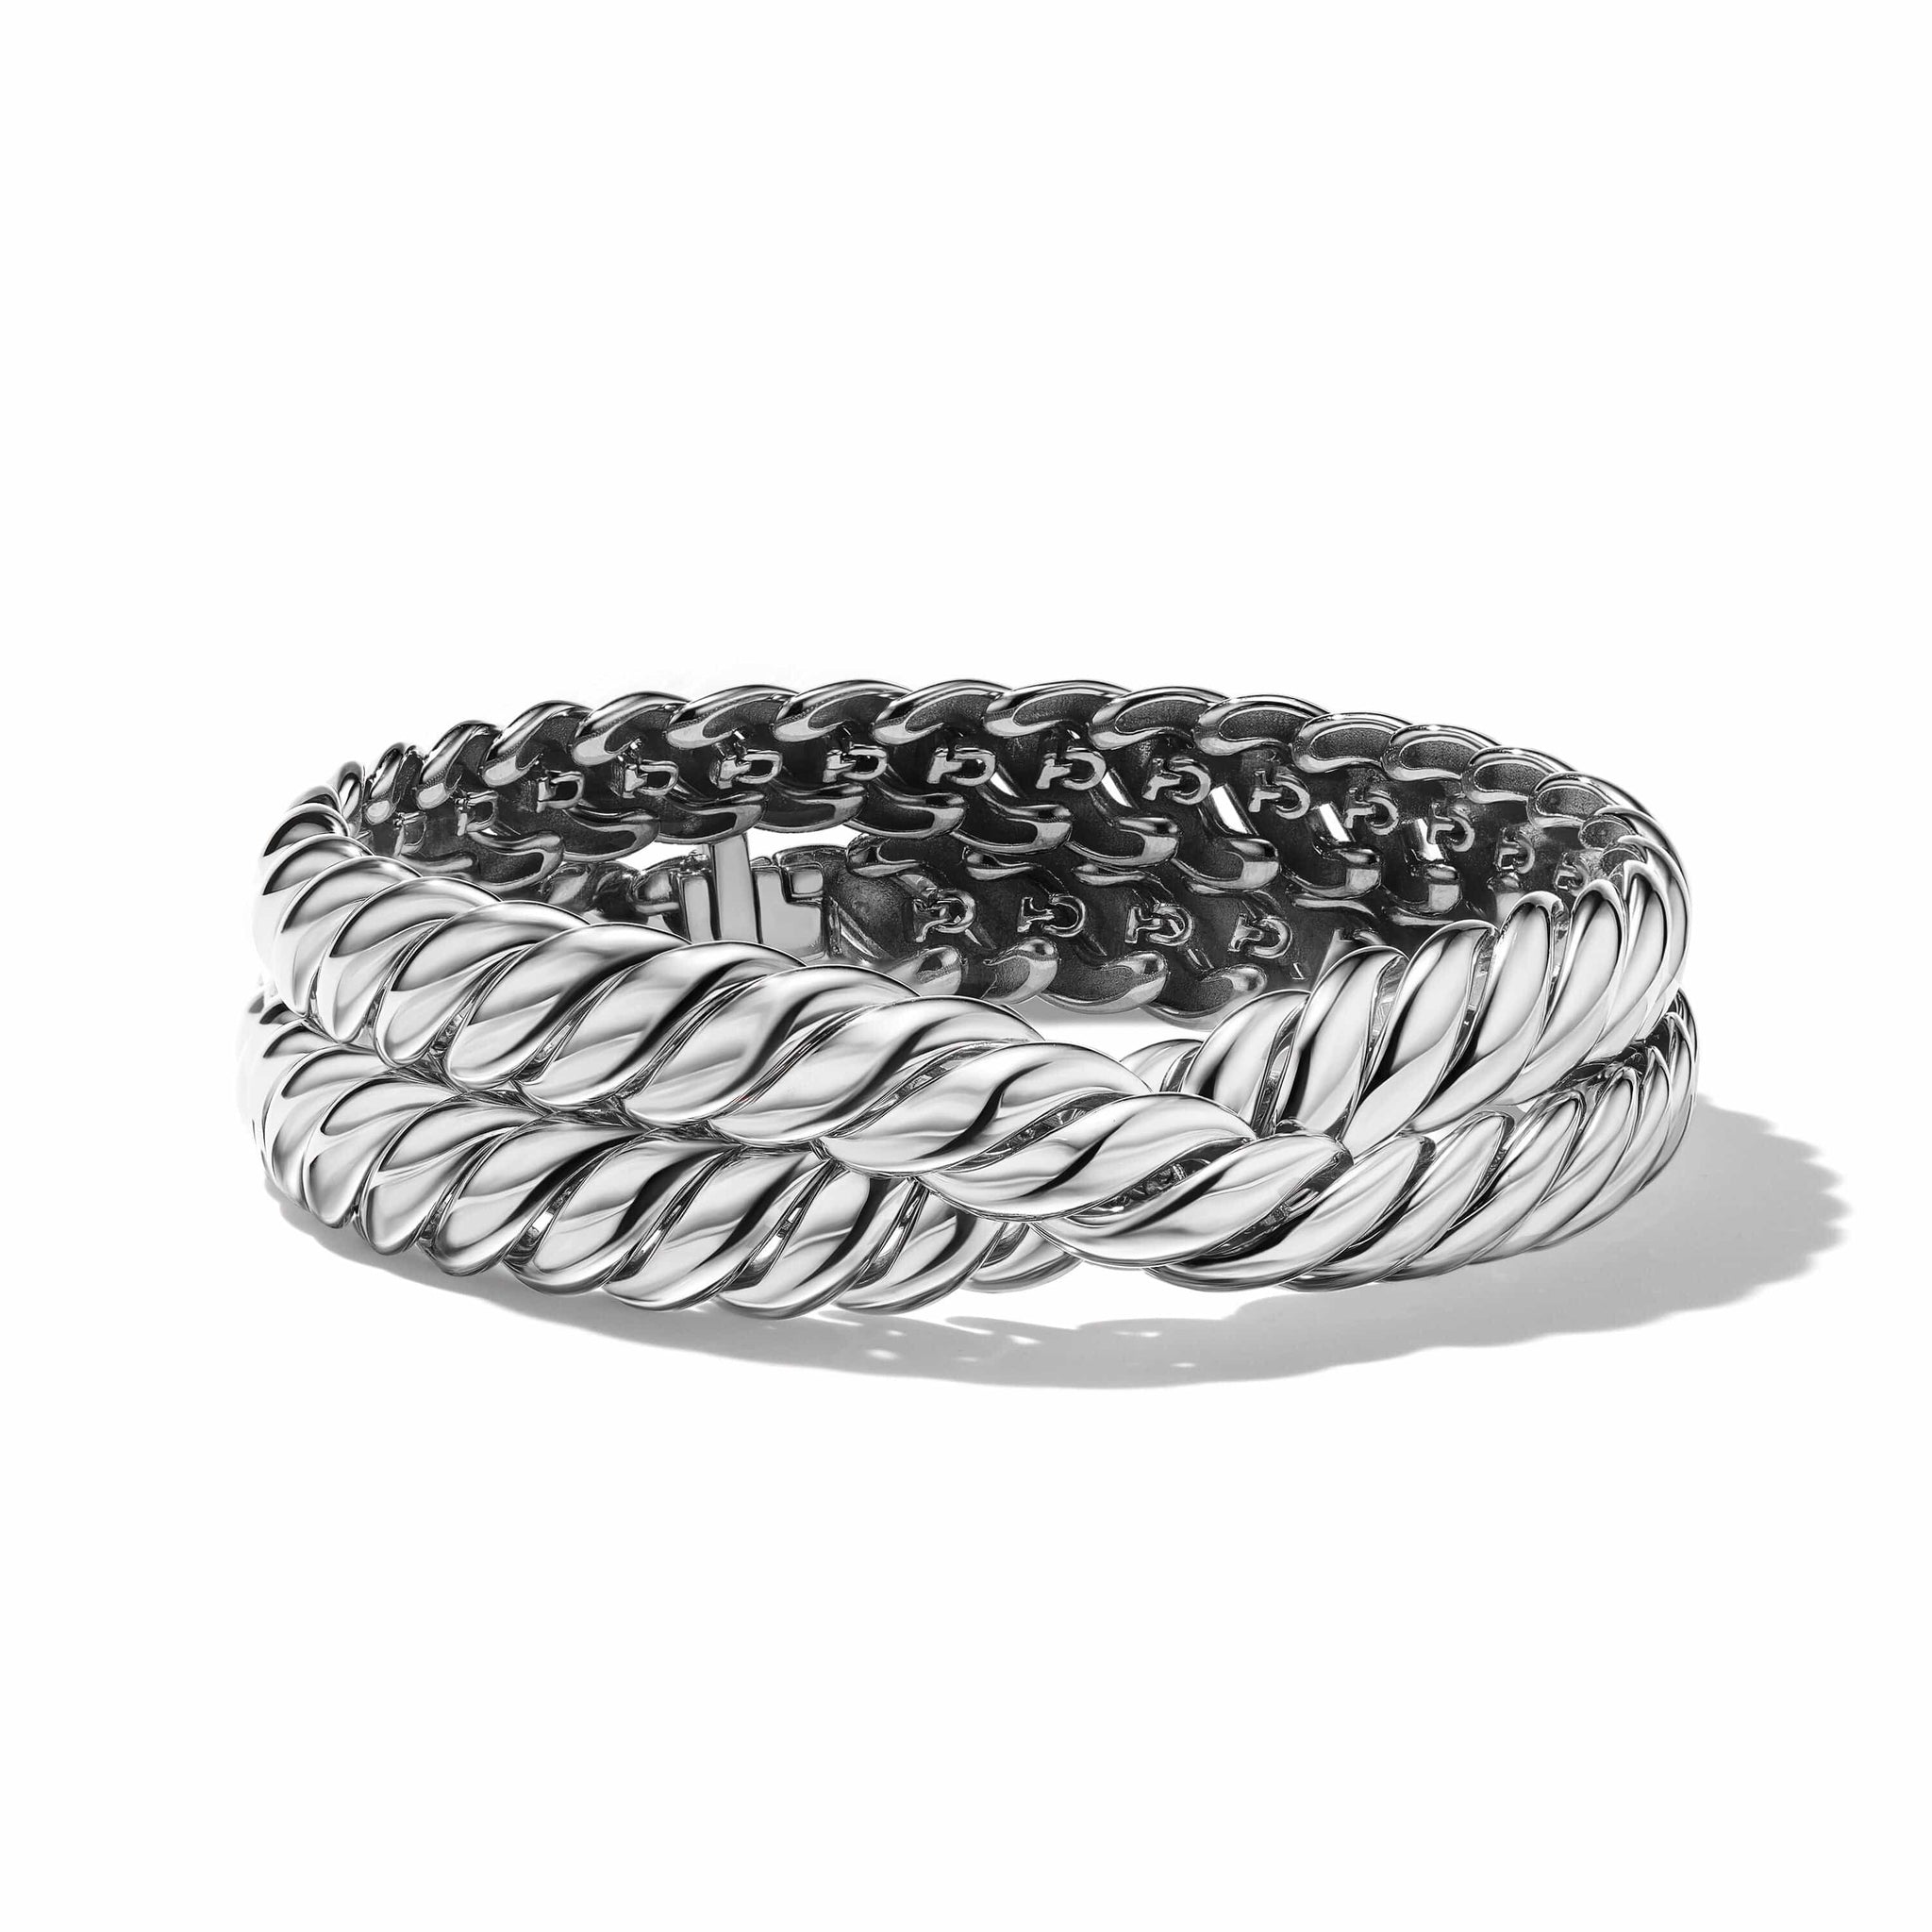 Sculpted Cable Double Wrap Bracelet in Sterling Silver